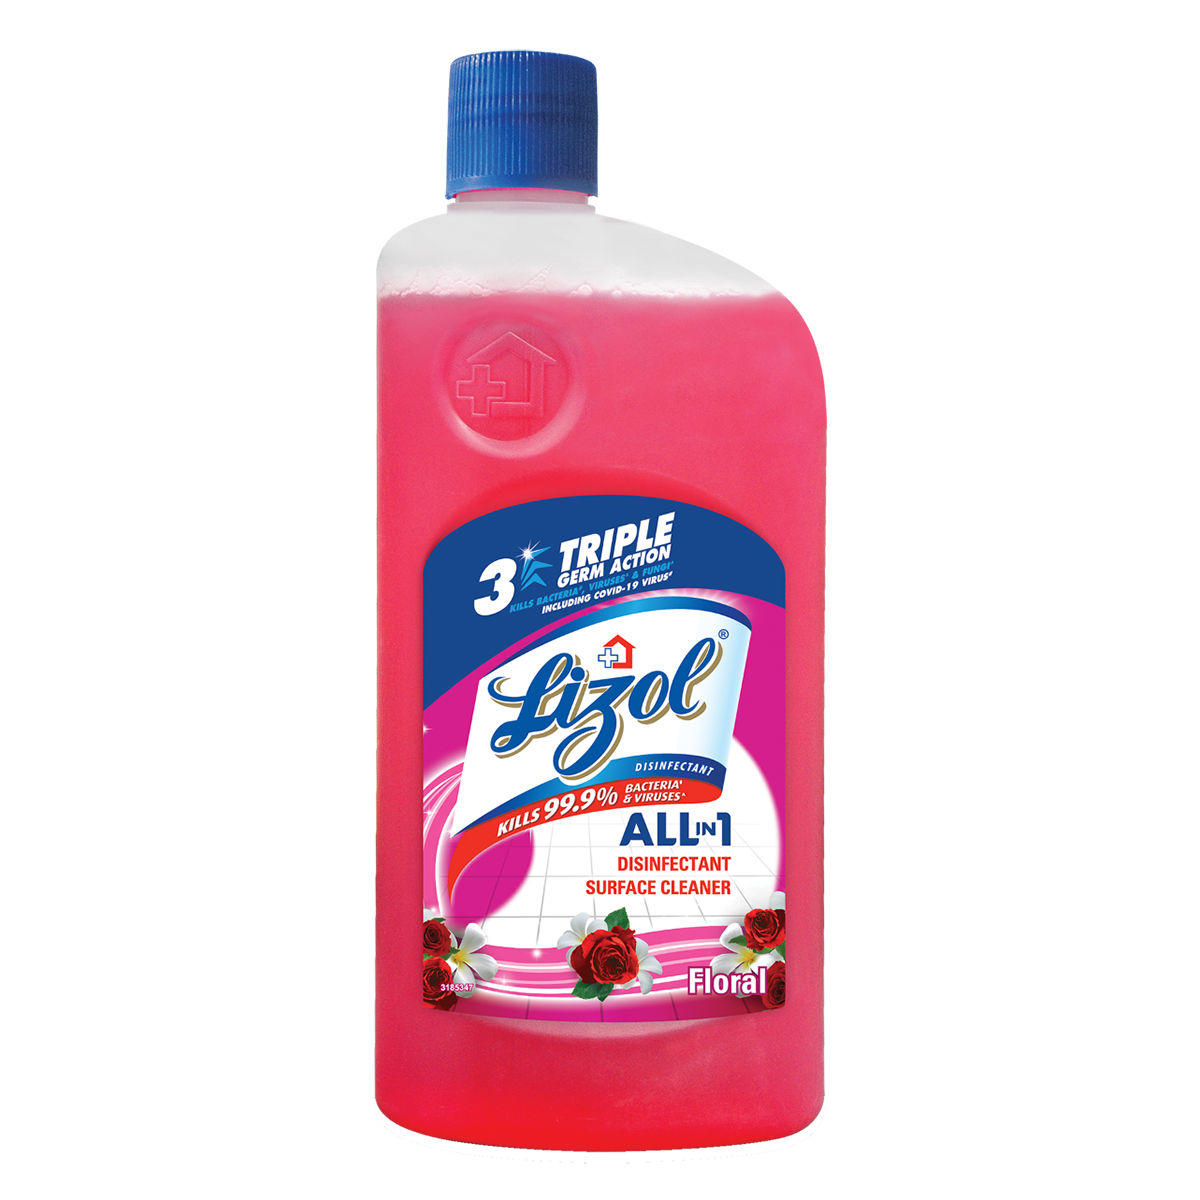 Buy Lizol Floral Disinfectant Surface Cleaner, 1 Litre Online